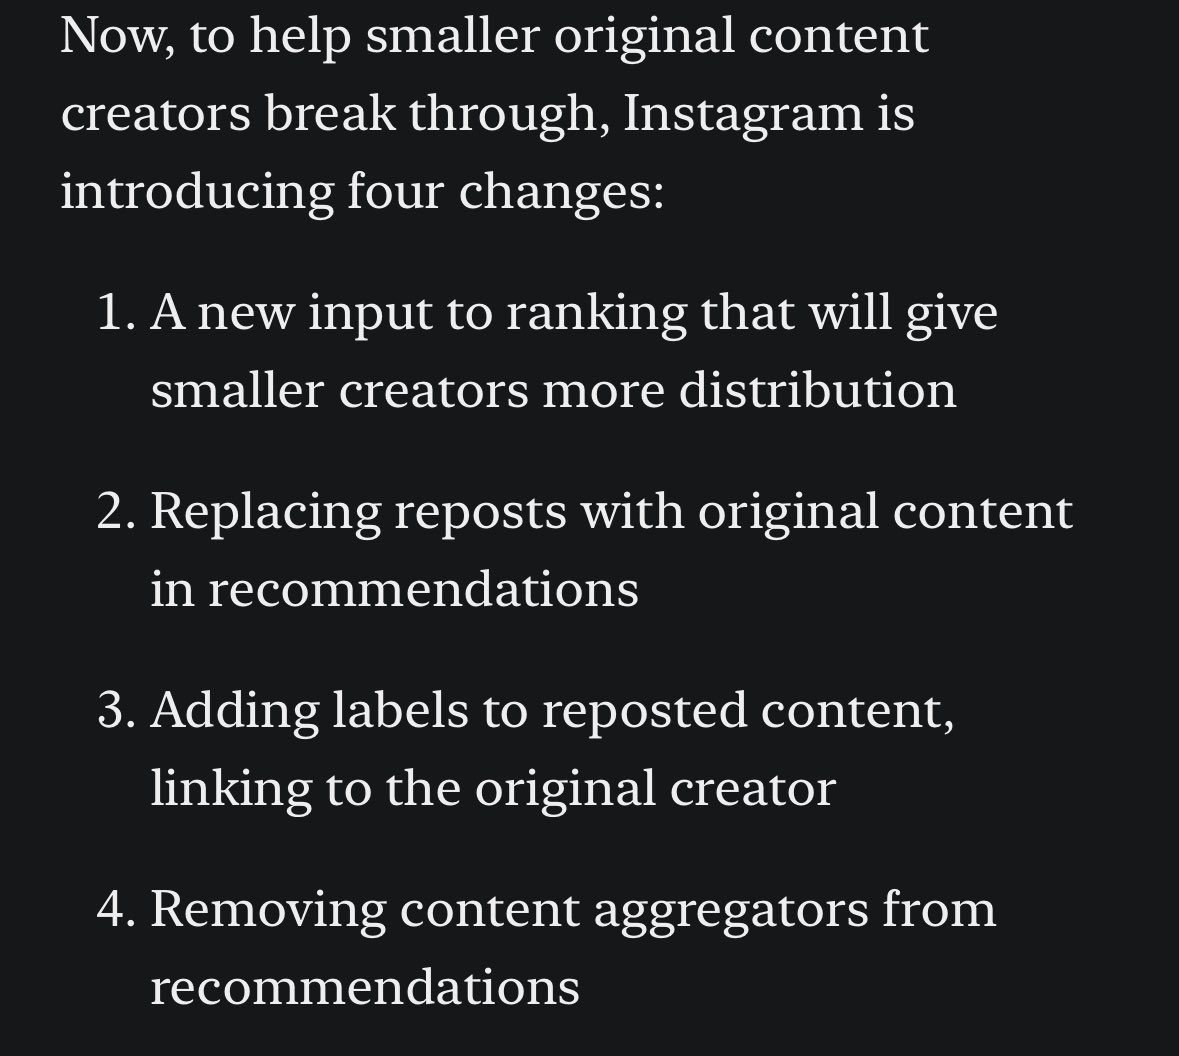 IG Reels is removing pages like Daquan, Barstool, Betches, NoJumper…etc. from their FYP recommendations. 🙌🏾 Trying to meet that Creator-led vibe of the TikTok FYP.